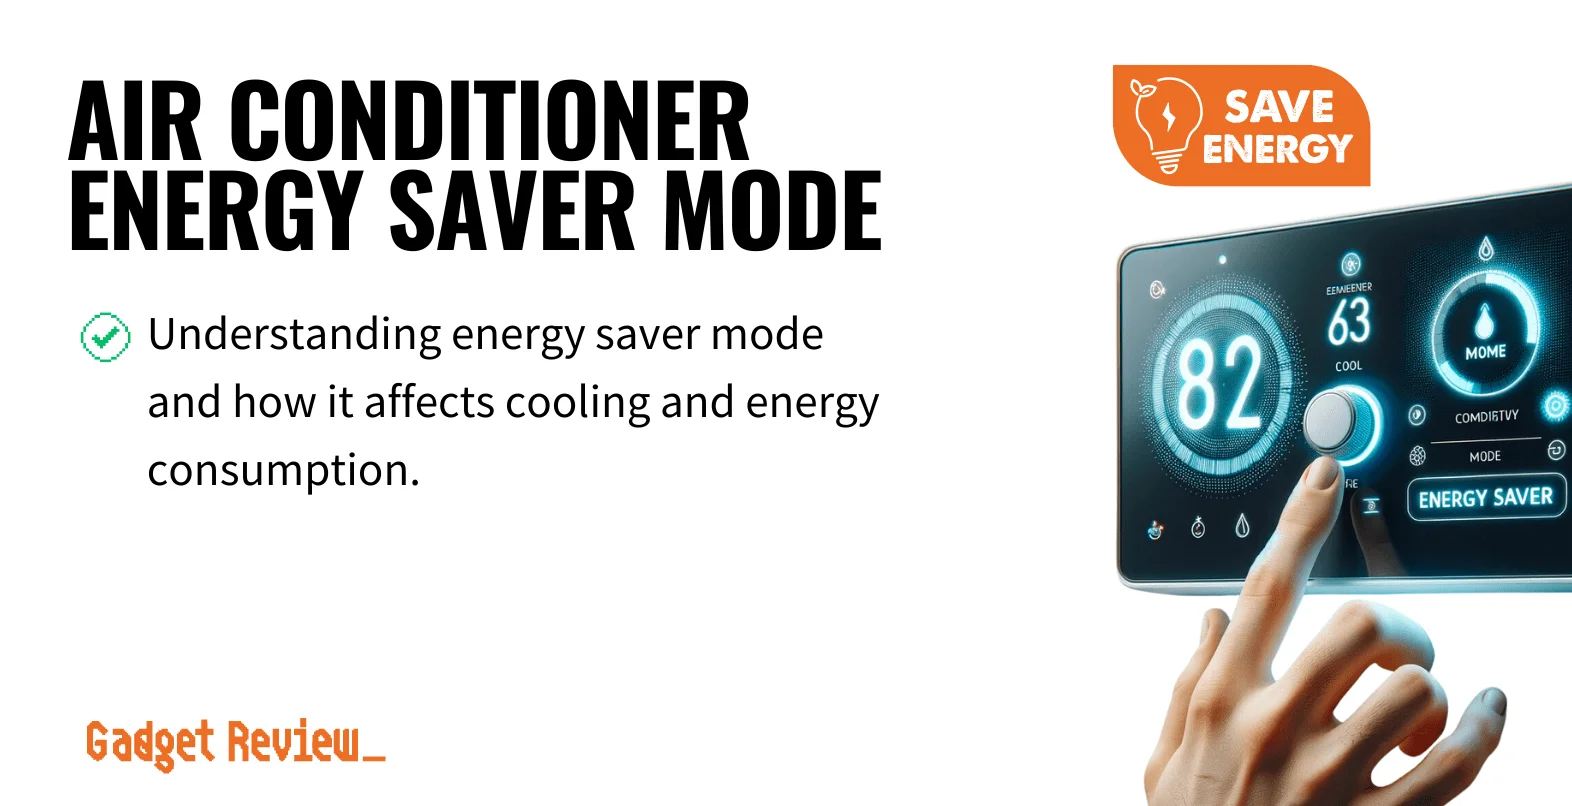 What Is An Air Conditioner’s Energy Saver Mode?